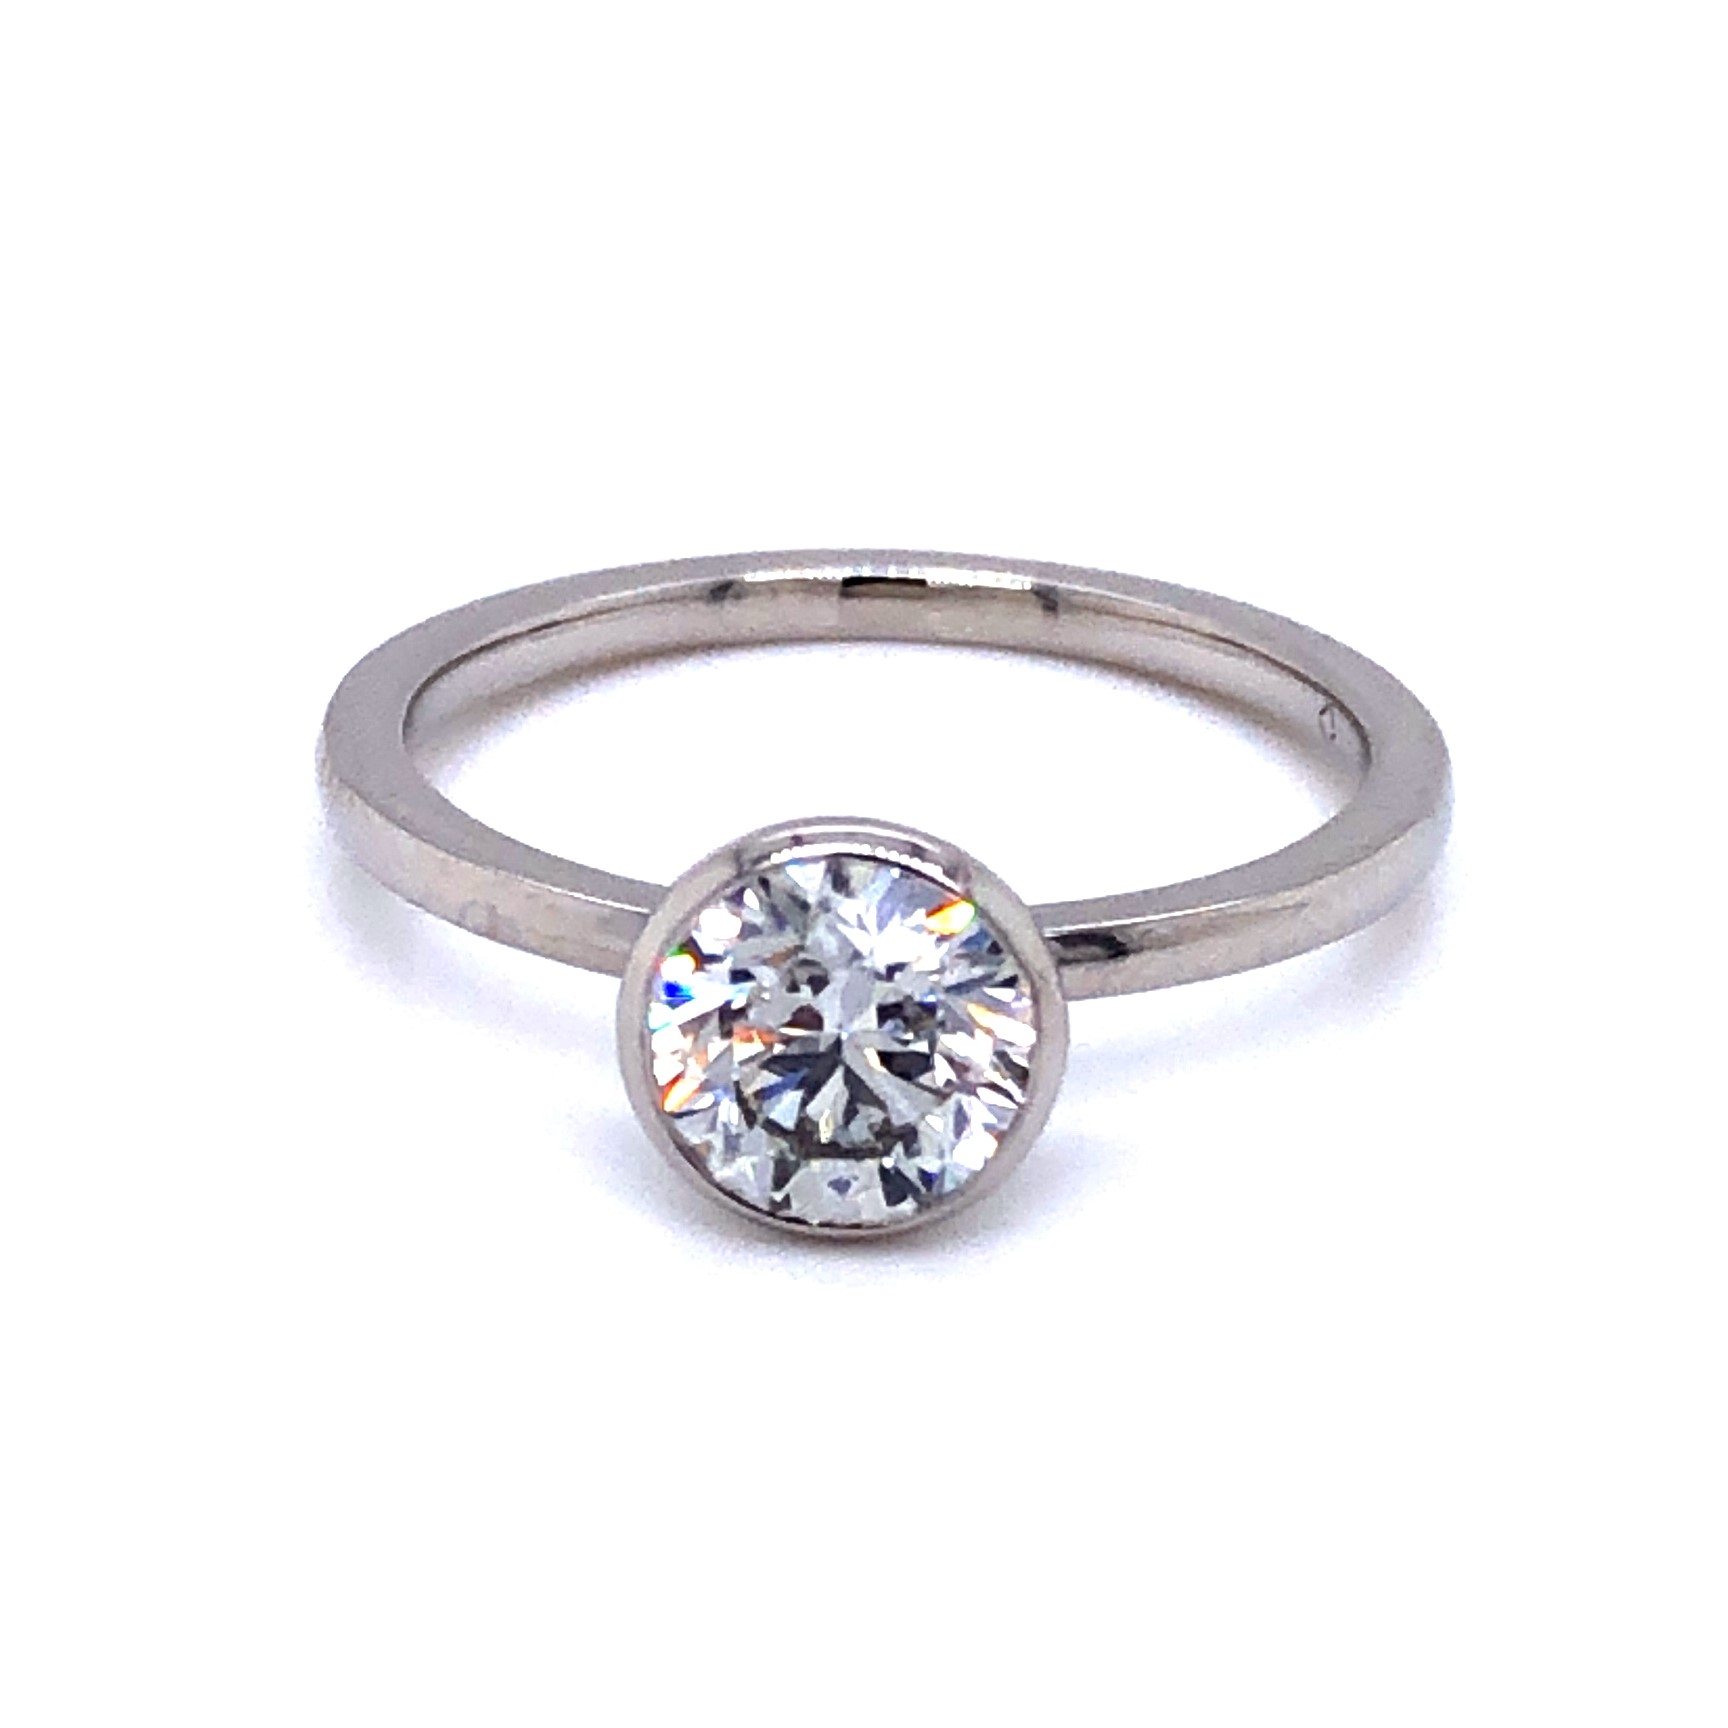 Lady s Platinum Engagement Ring  With One 1.01Ct Round Brilliant H Si2 Forevermark Diamond And 20=0.05Tw Round Brilliant G VS Diamonds